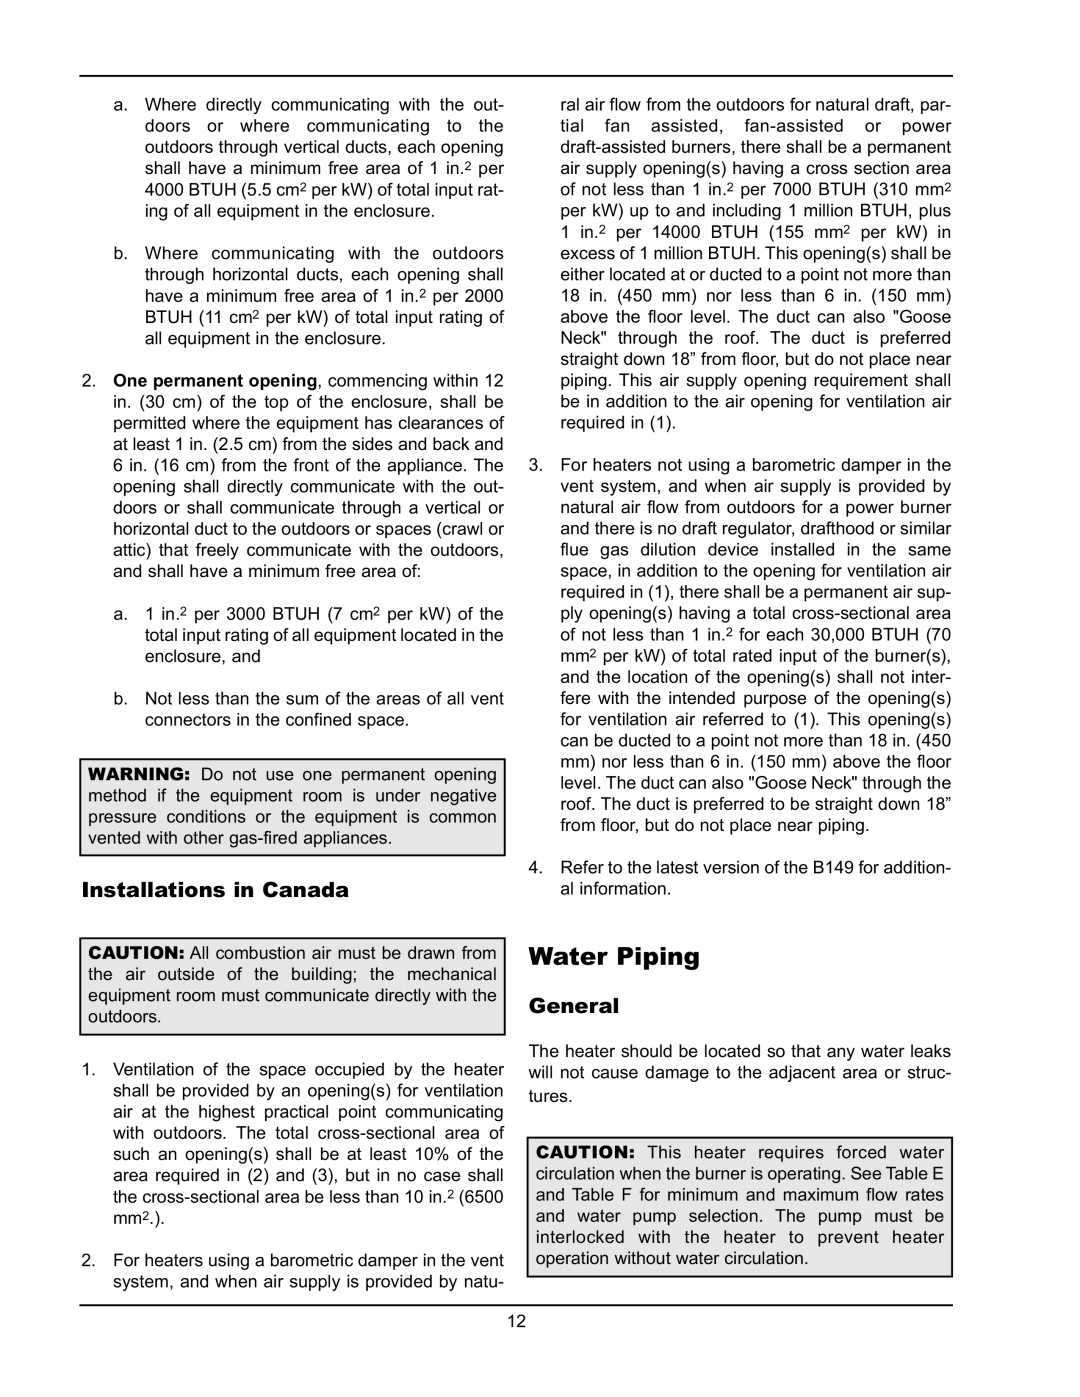 Raypak HD401, HD101 operating instructions Water Piping, Installations in Canada, General 